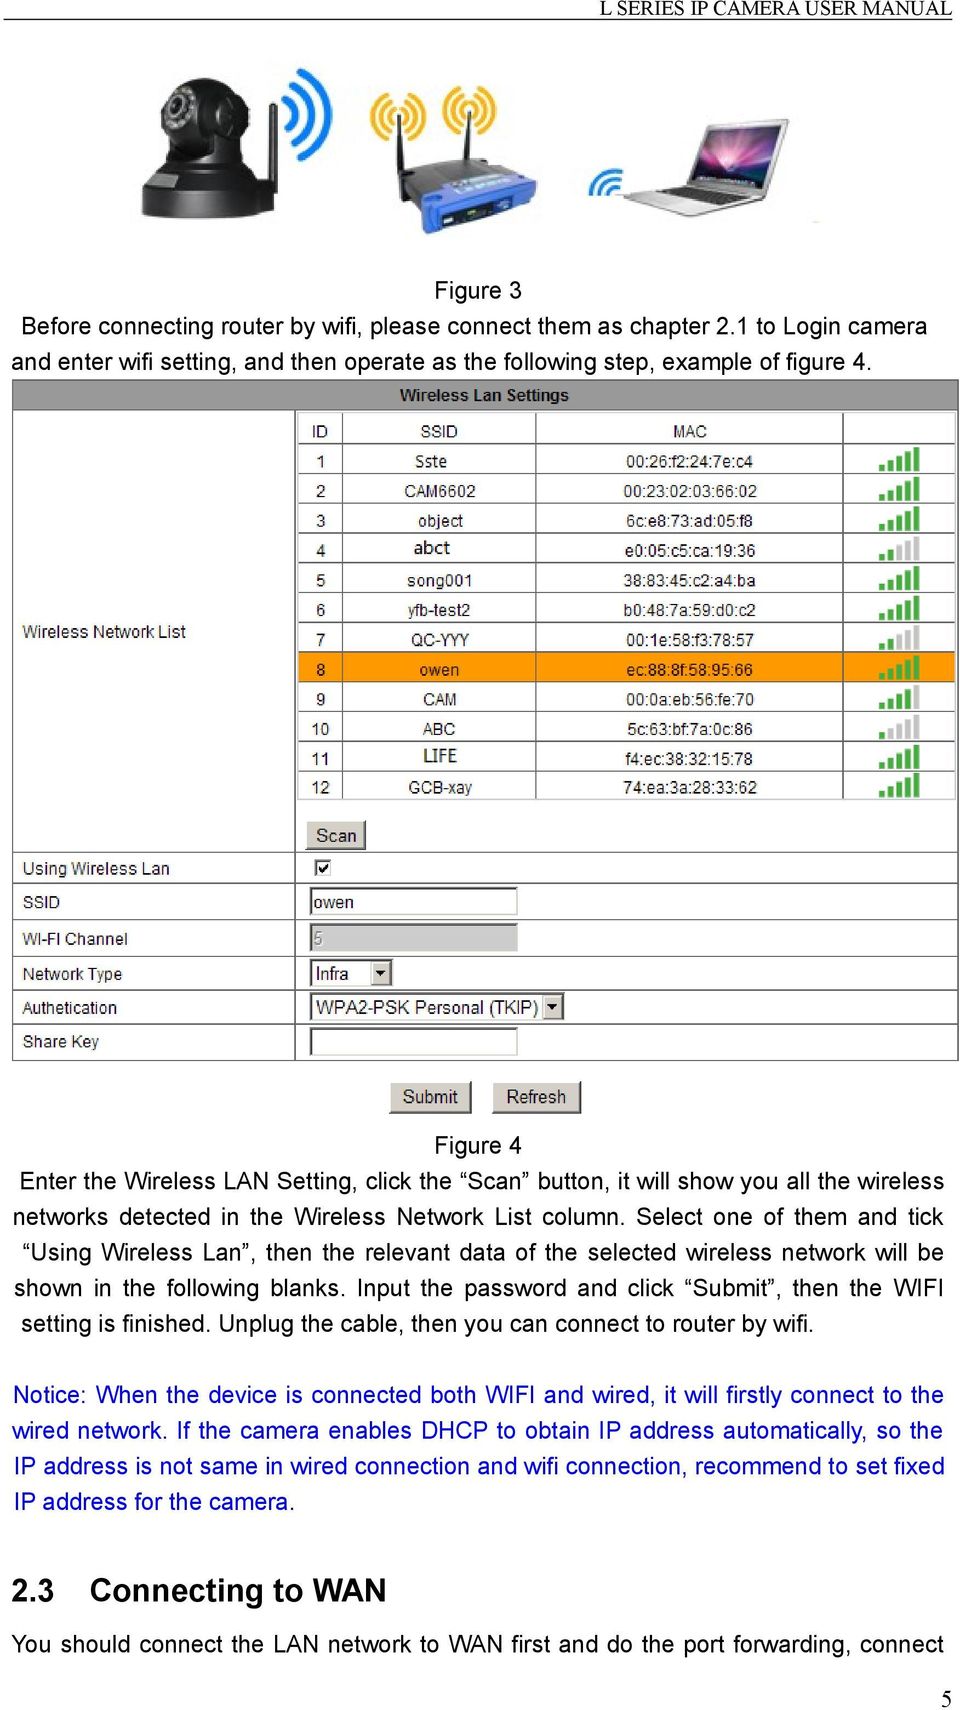 Select one of them and tick Using Wireless Lan, then the relevant data of the selected wireless network will be shown in the following blanks.